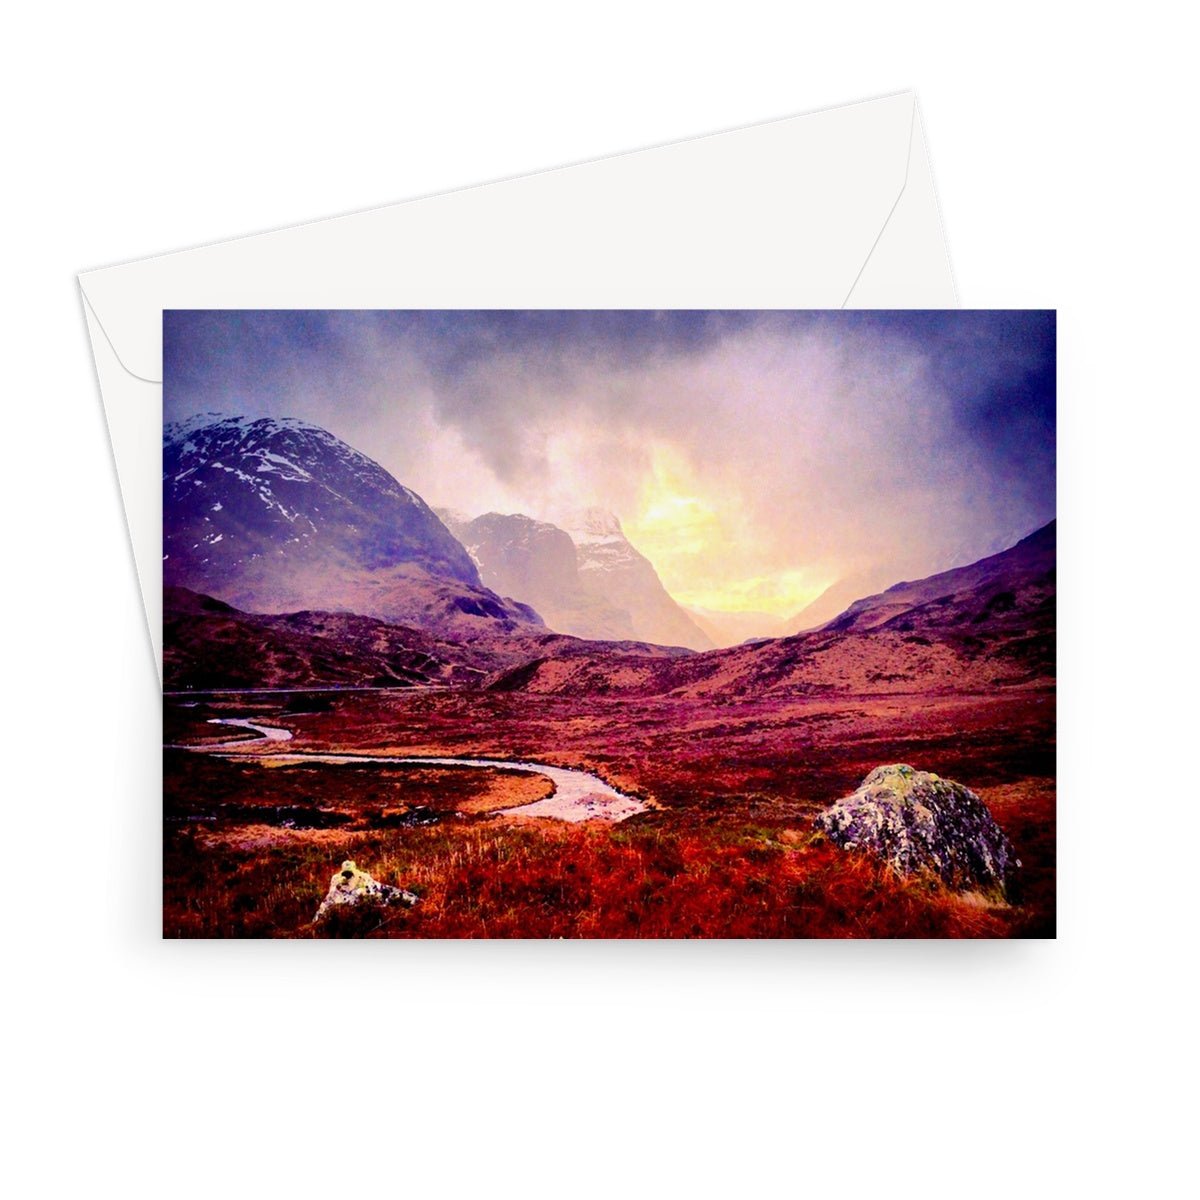 A Brooding Glencoe Art Gifts Greeting Card-Greetings Cards-Glencoe Art Gallery-7"x5"-10 Cards-Paintings, Prints, Homeware, Art Gifts From Scotland By Scottish Artist Kevin Hunter